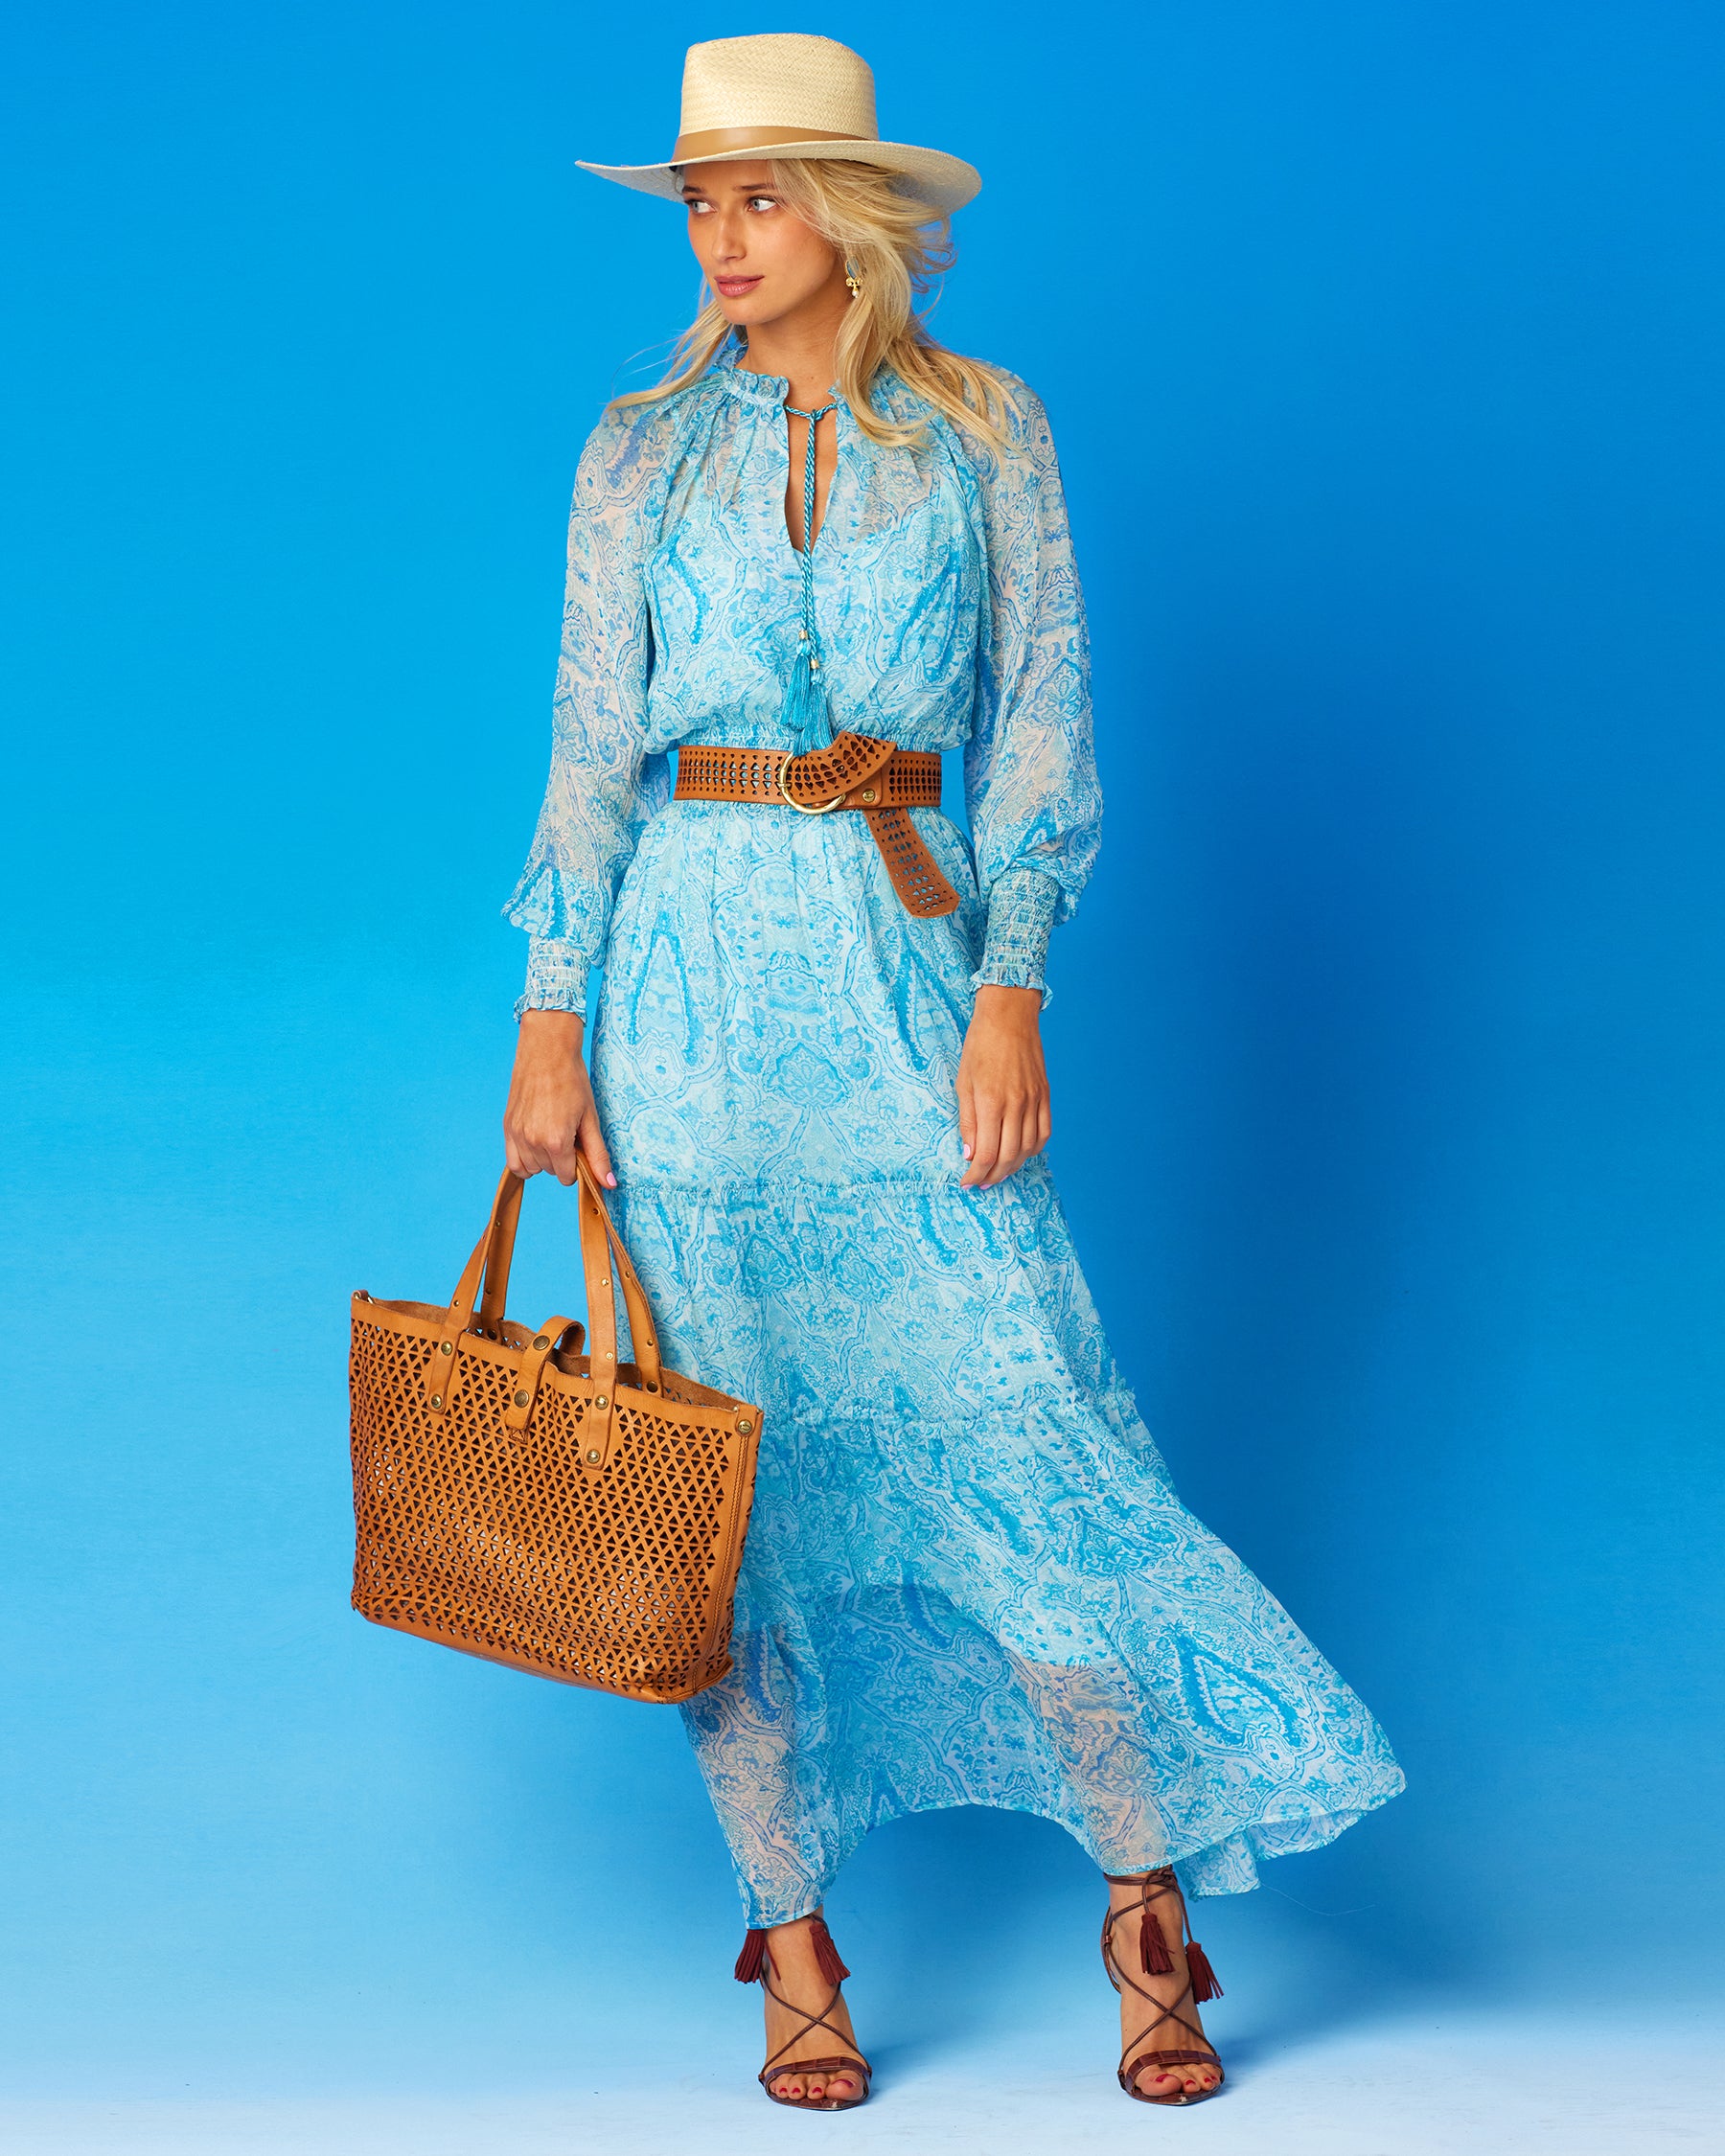 Emillie Maxi Crinkle Chiffon Dress in Turquoise Paisley Worn with Campomaggi Accessories in a Casual Way